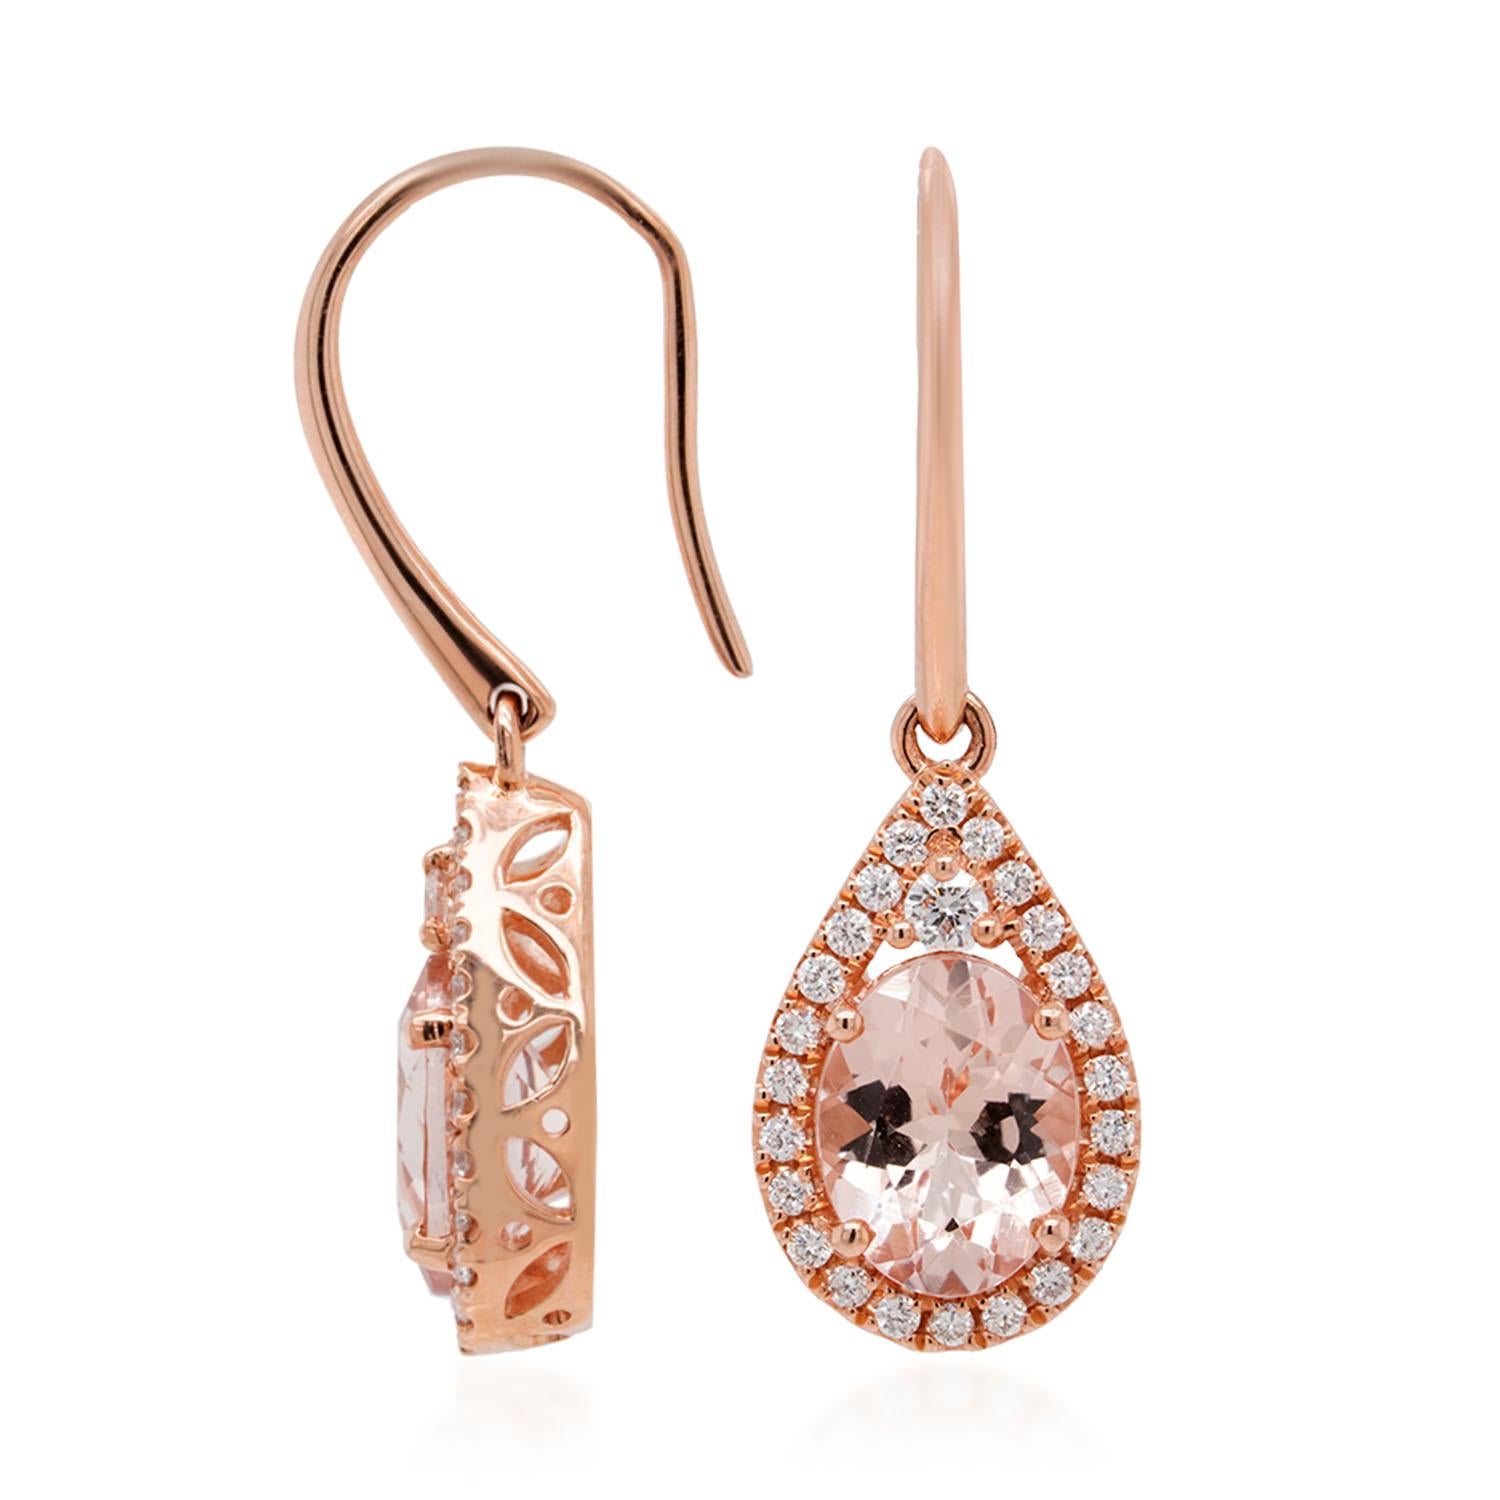 Introducing our exquisite Morganite 3.10 Carat Earrings, a stunning addition to any jewelry collection. These earrings feature a unique and elegant shepherds hook design that's both stylish and comfortable to wear. Crafted from high-quality 14K rose